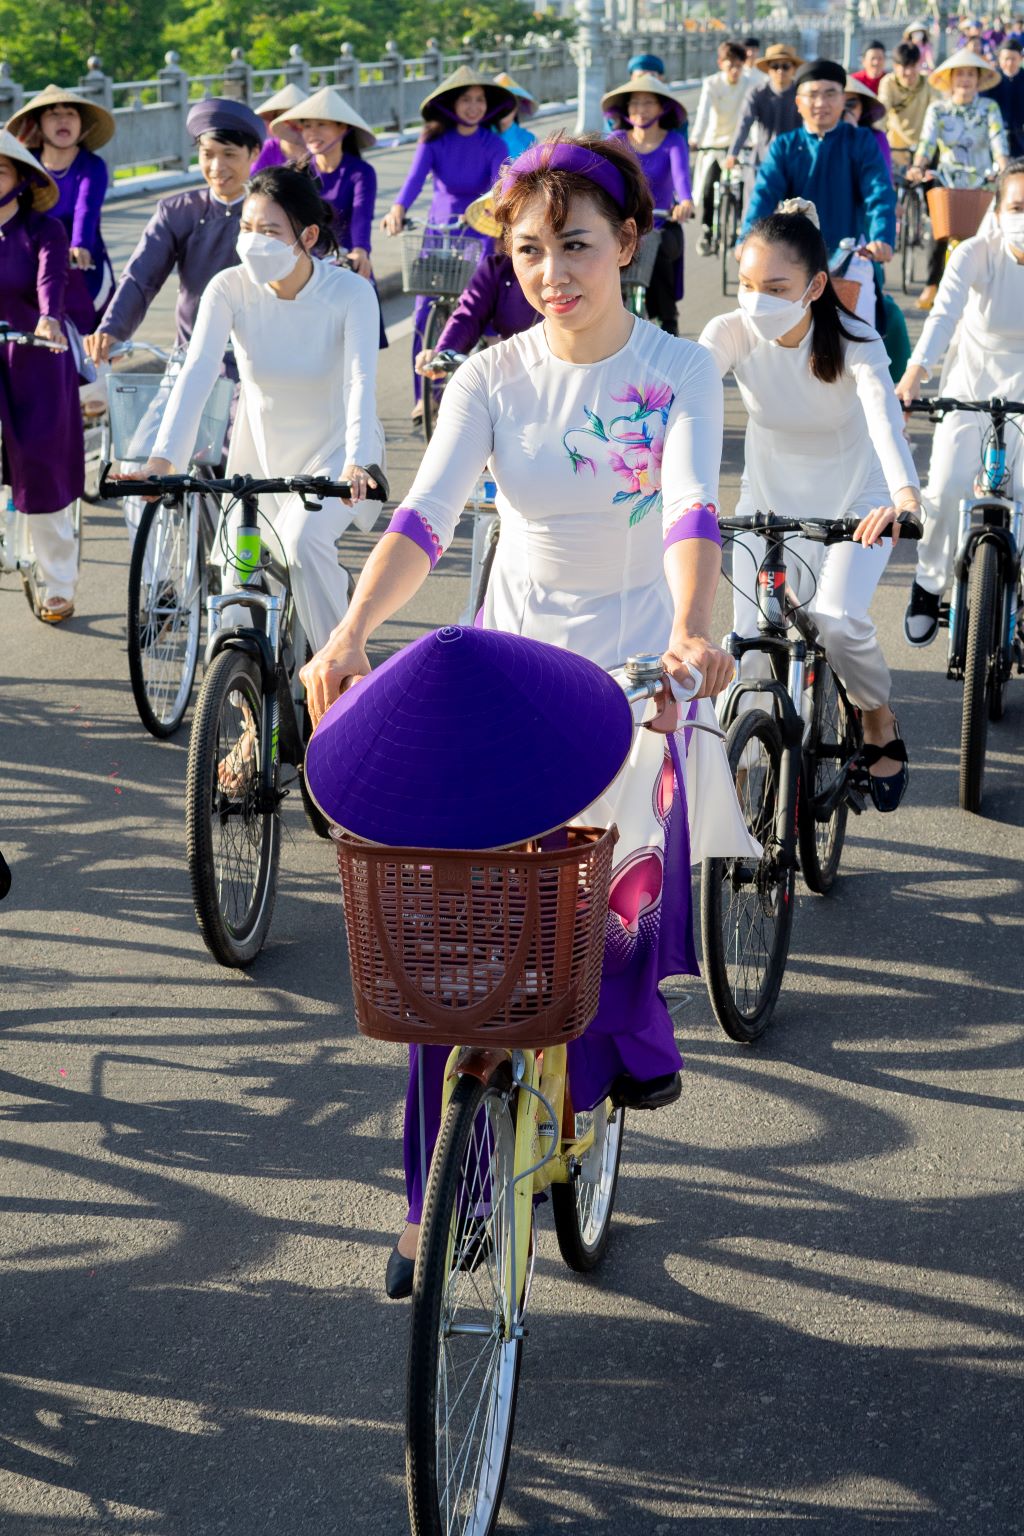 The parade with bicycles attracting hundreds of participants